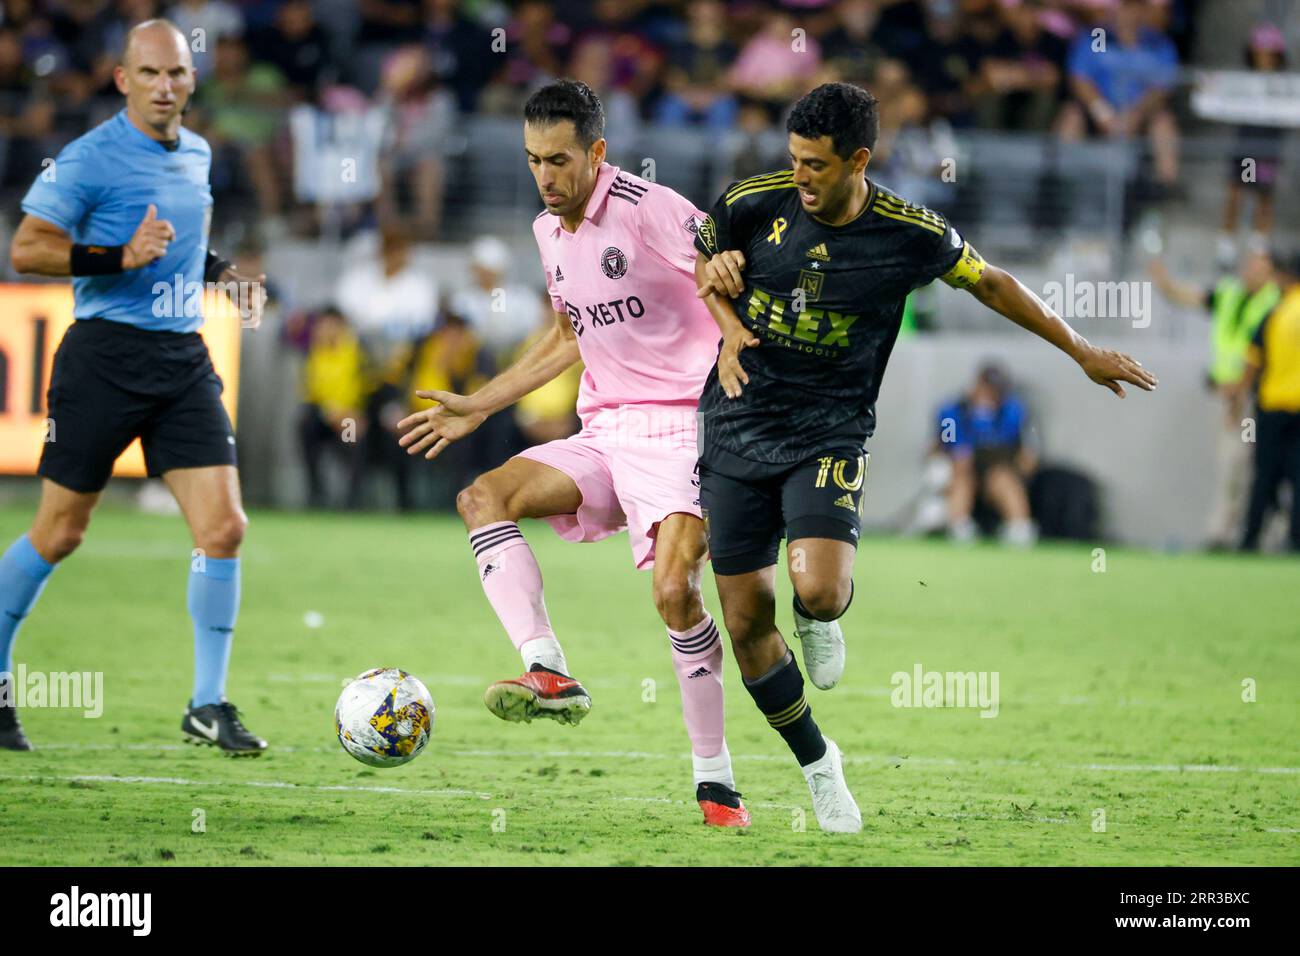 Inter Miami's Sergio Busquets (L) and Los Angeles FC's Carlos Vela (R) in action during an MLS soccer match in Los Angeles. Inter Miami CF 3:1 Los Angeles FC. Stock Photo